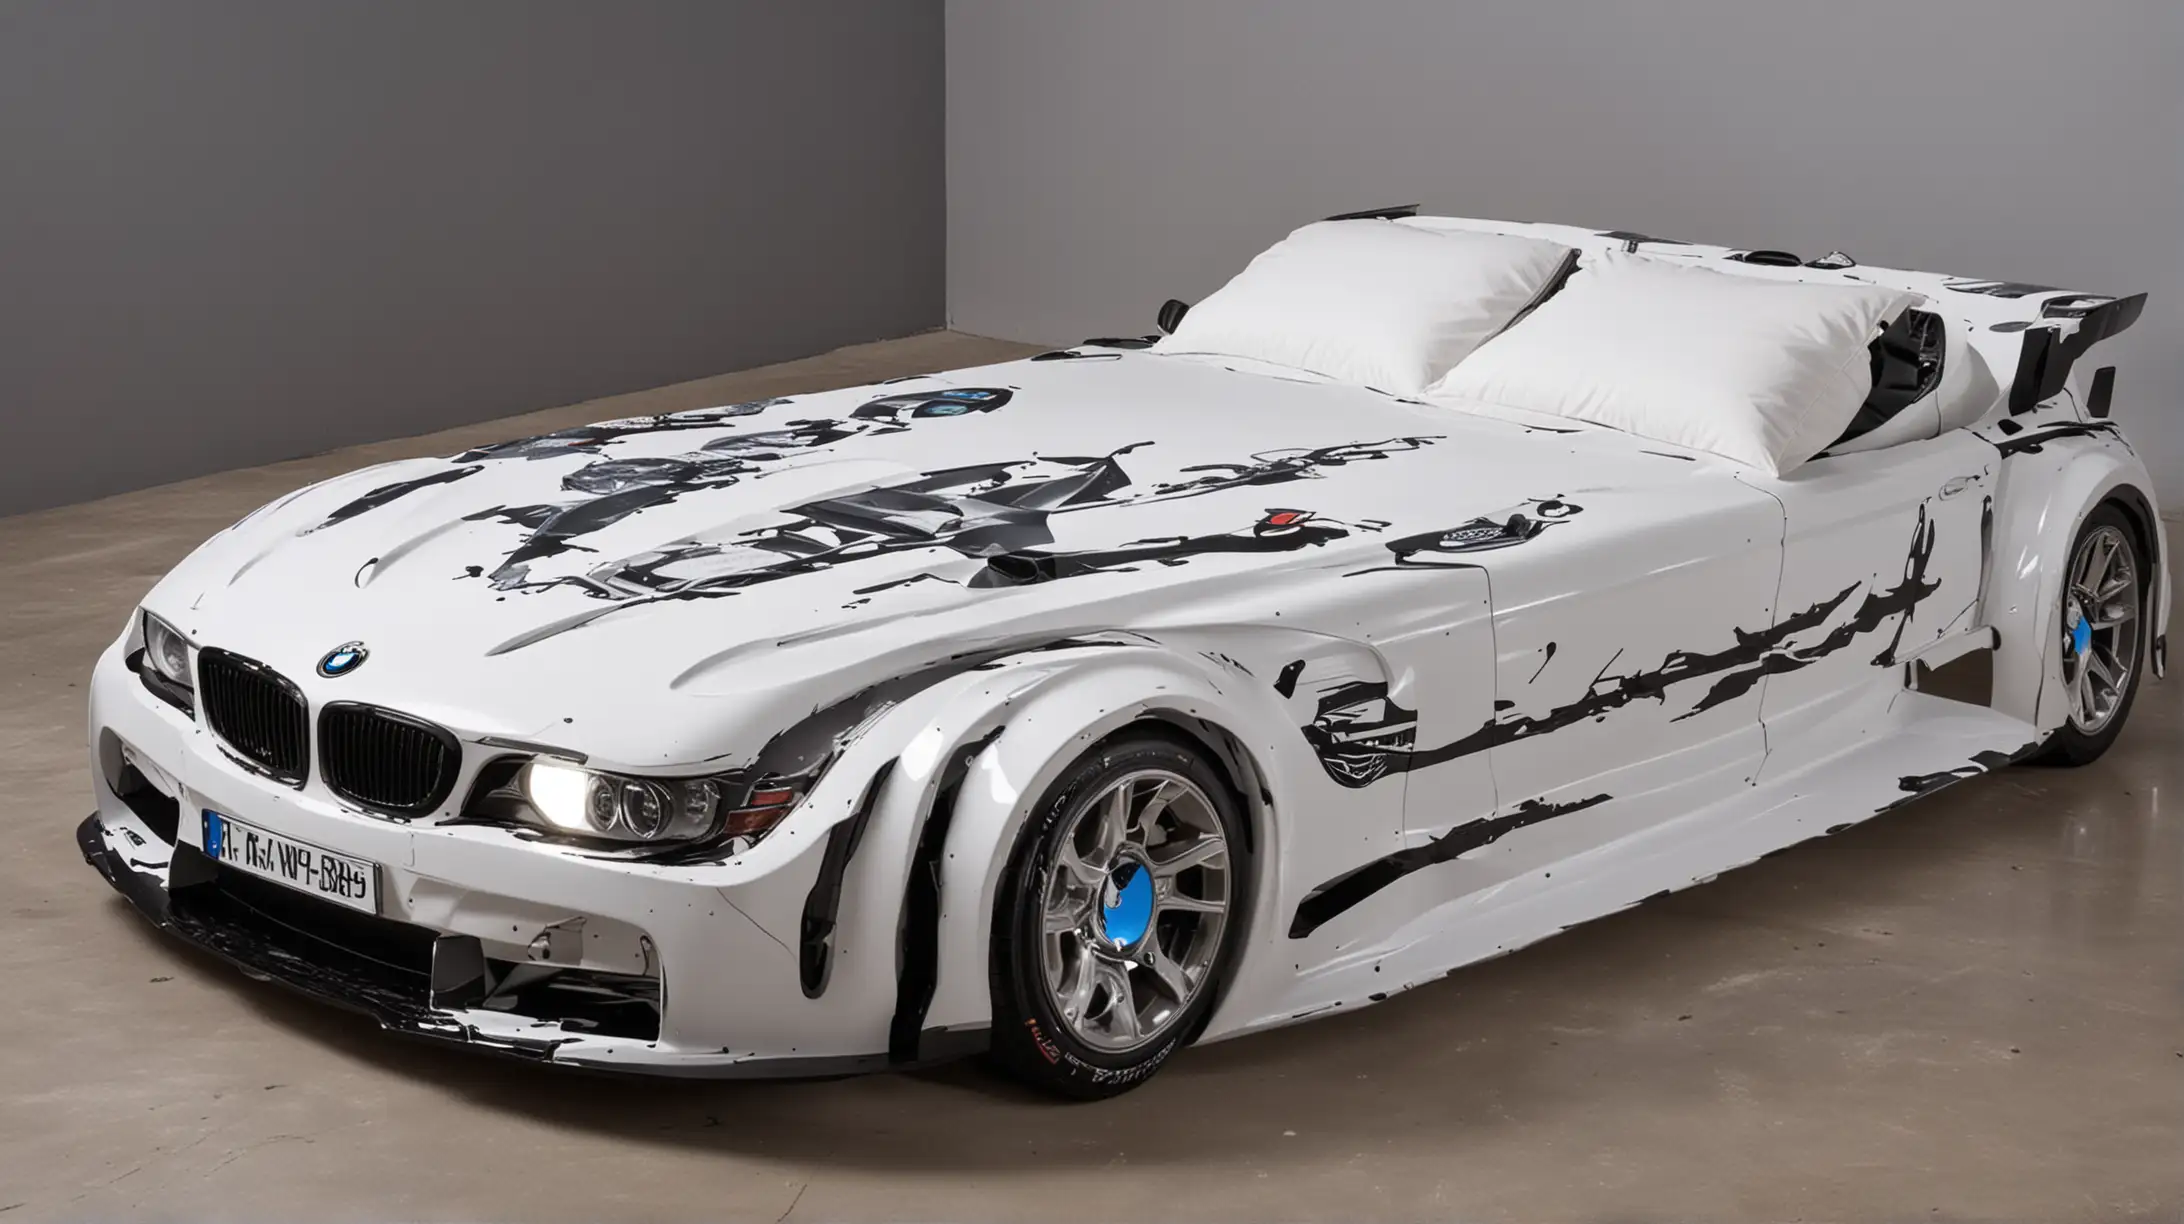 Double bed in the shape of a BMW car with headlights on and Splash graphics